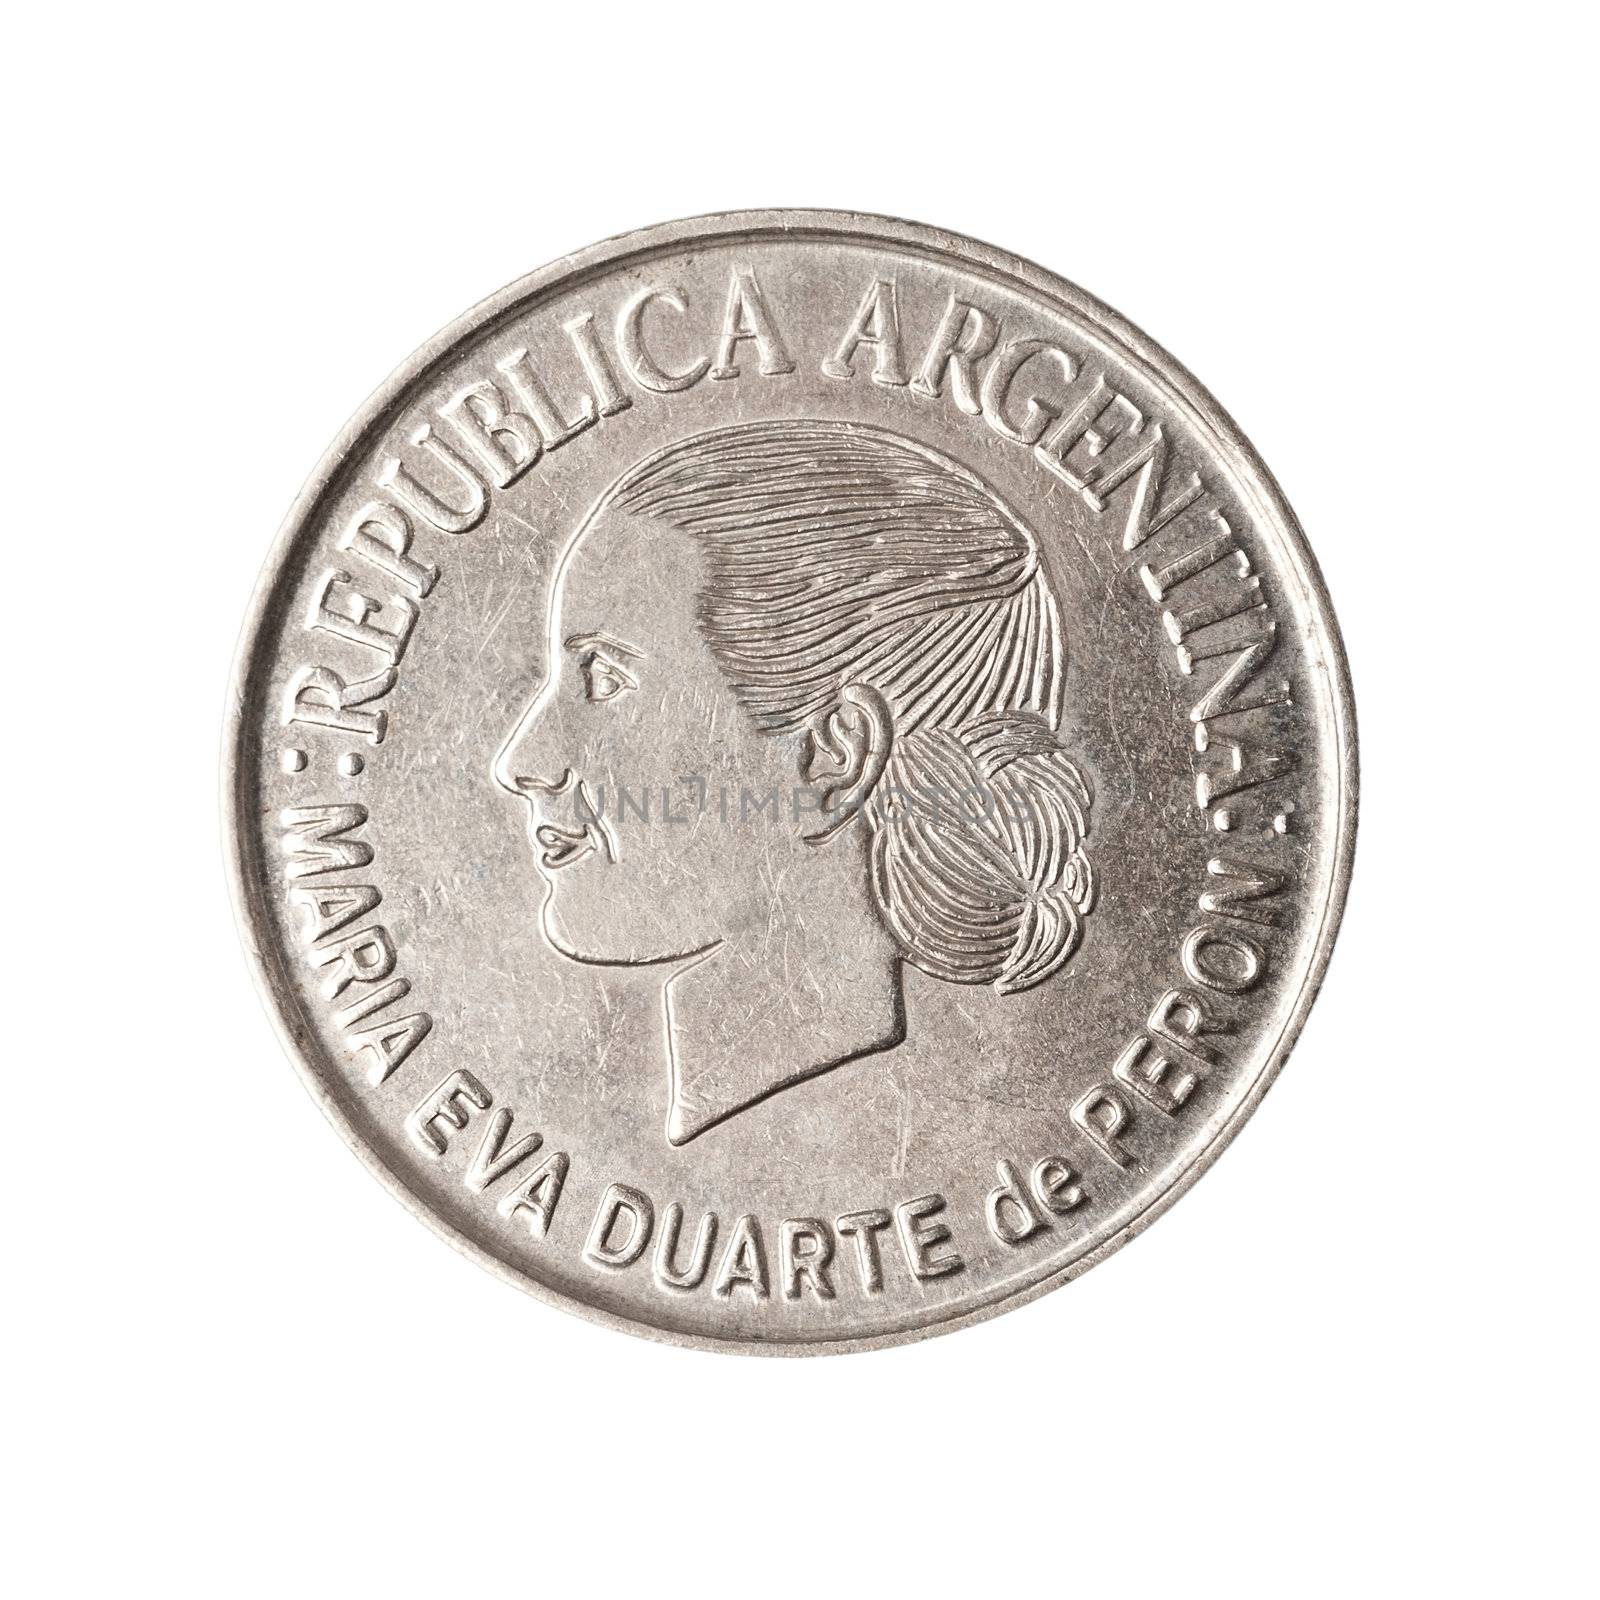 Coin from argentina, showing the face of famous political leader Eva Peron, AKA Evita. Clipping path supplied.